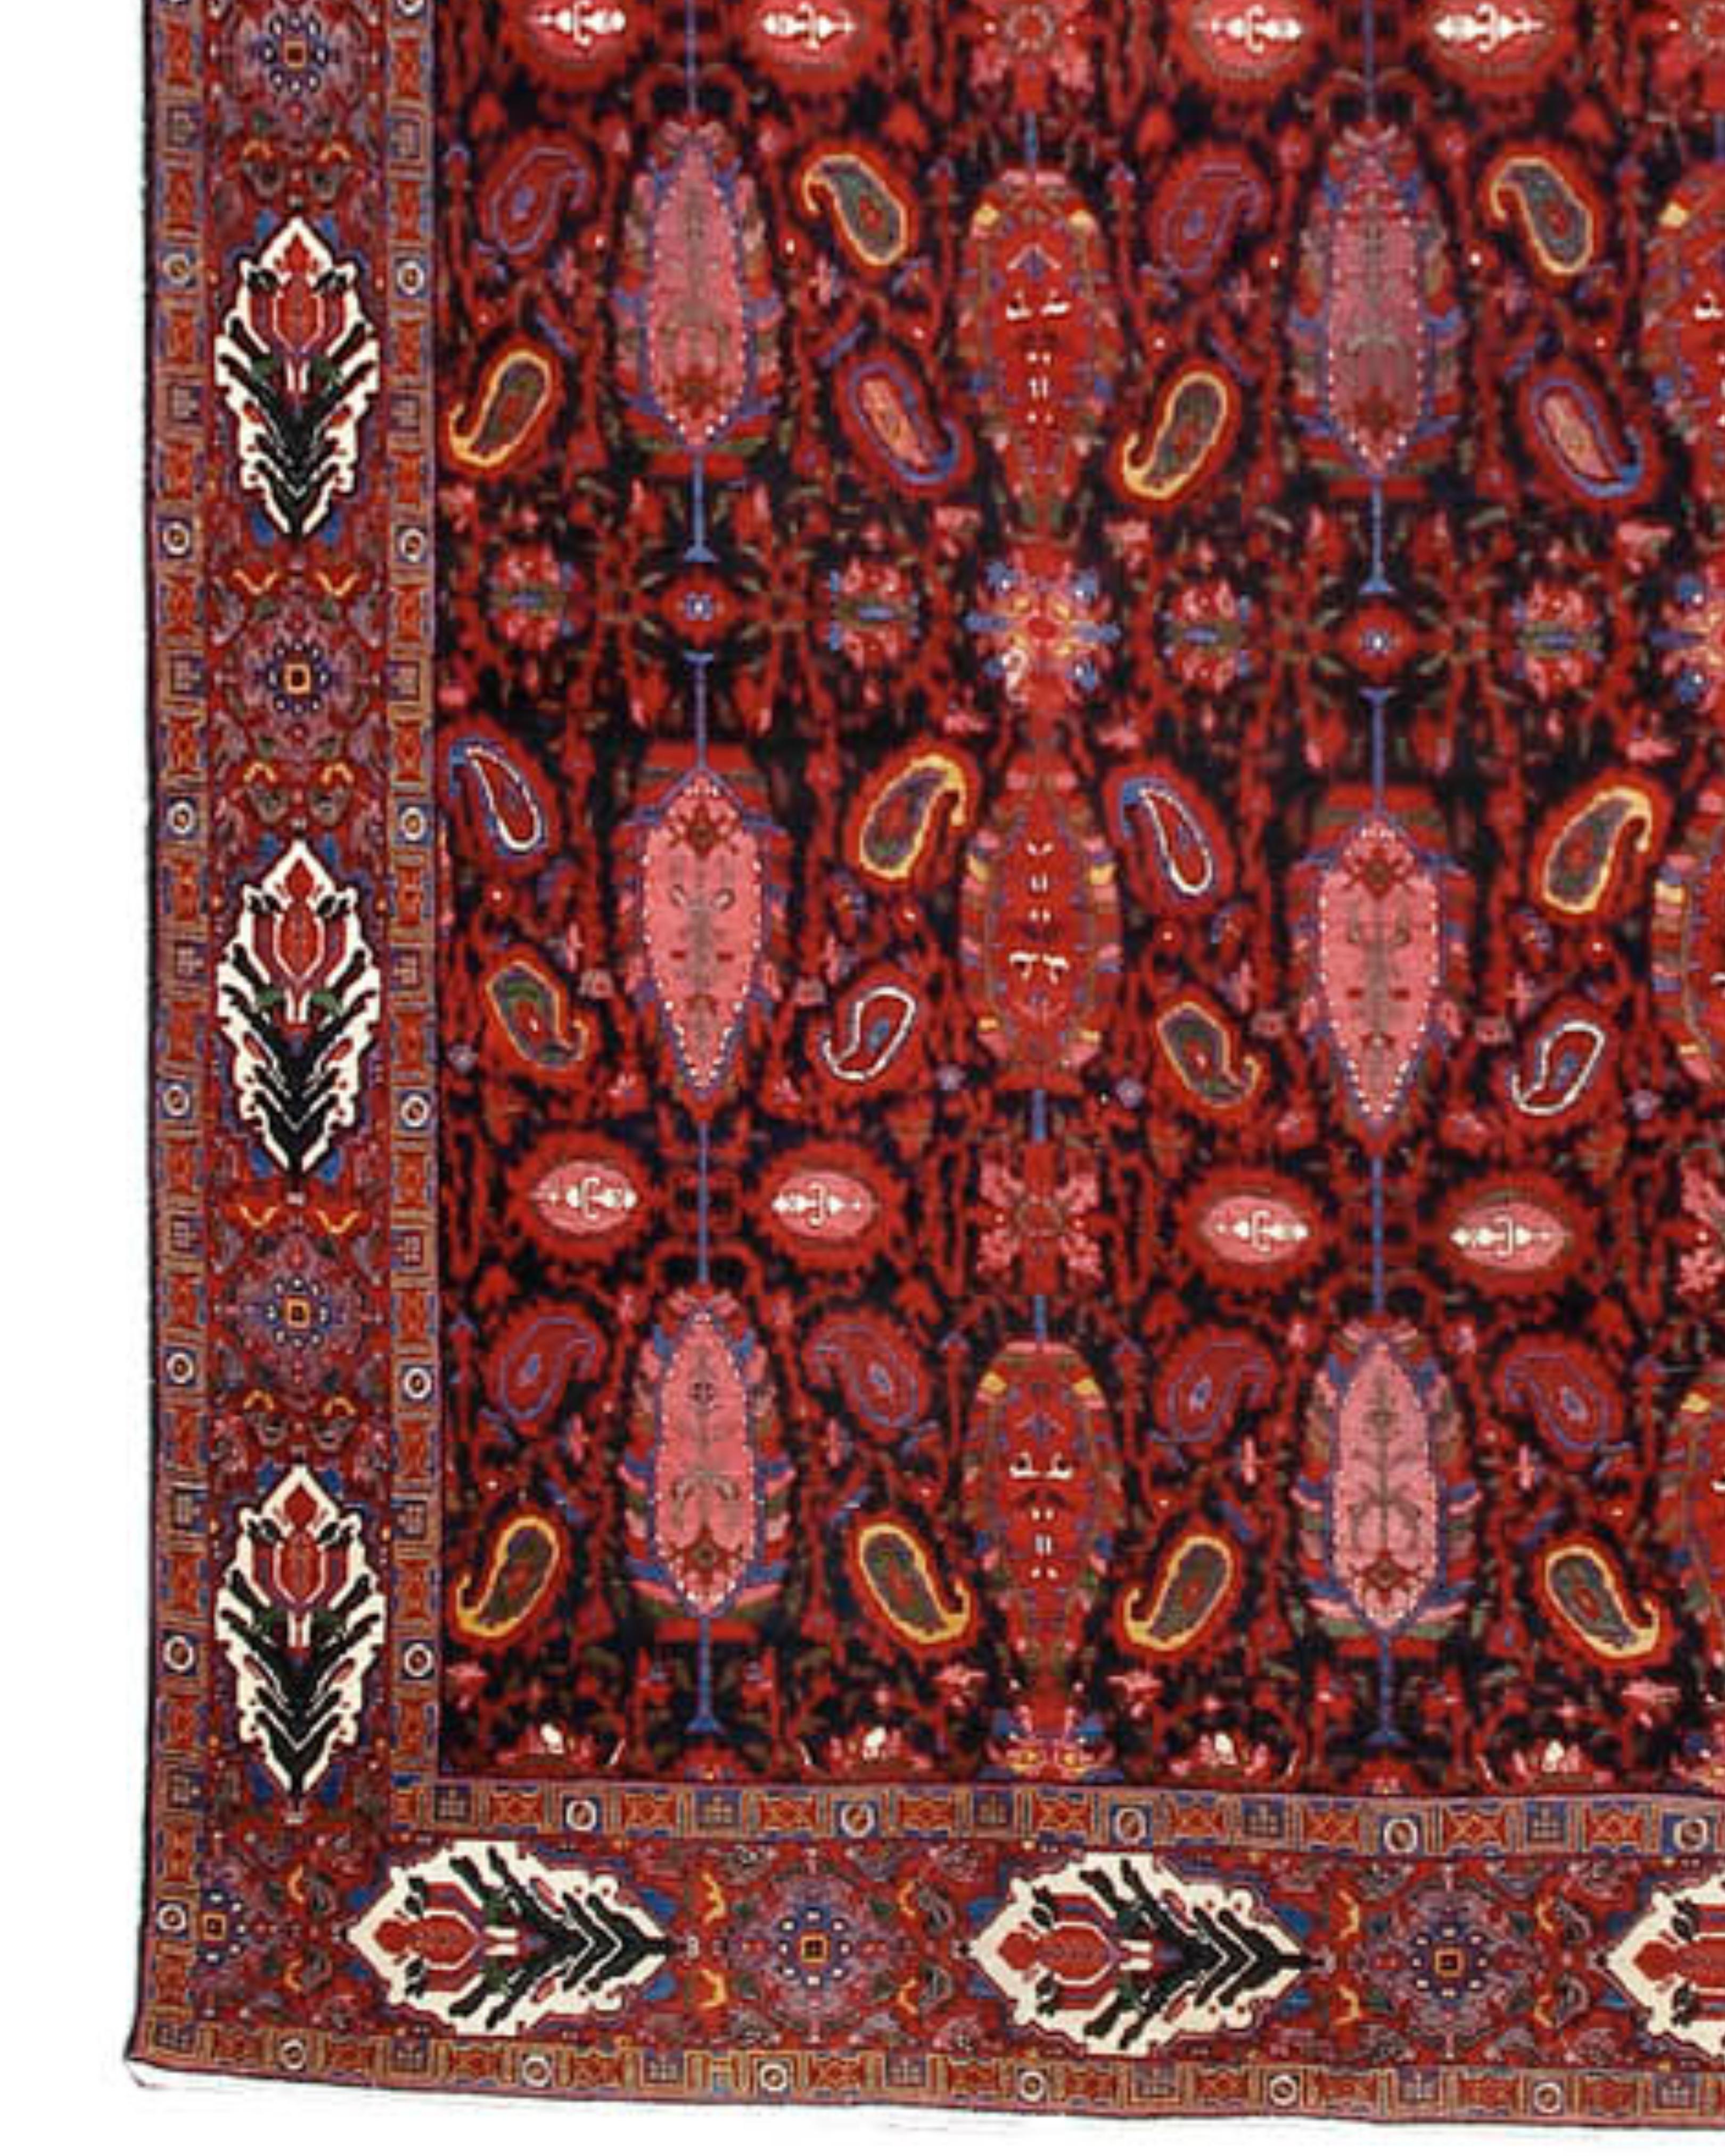 Hand-Knotted Antique Oversized Persian Malayer Carpet, c. 1900 For Sale